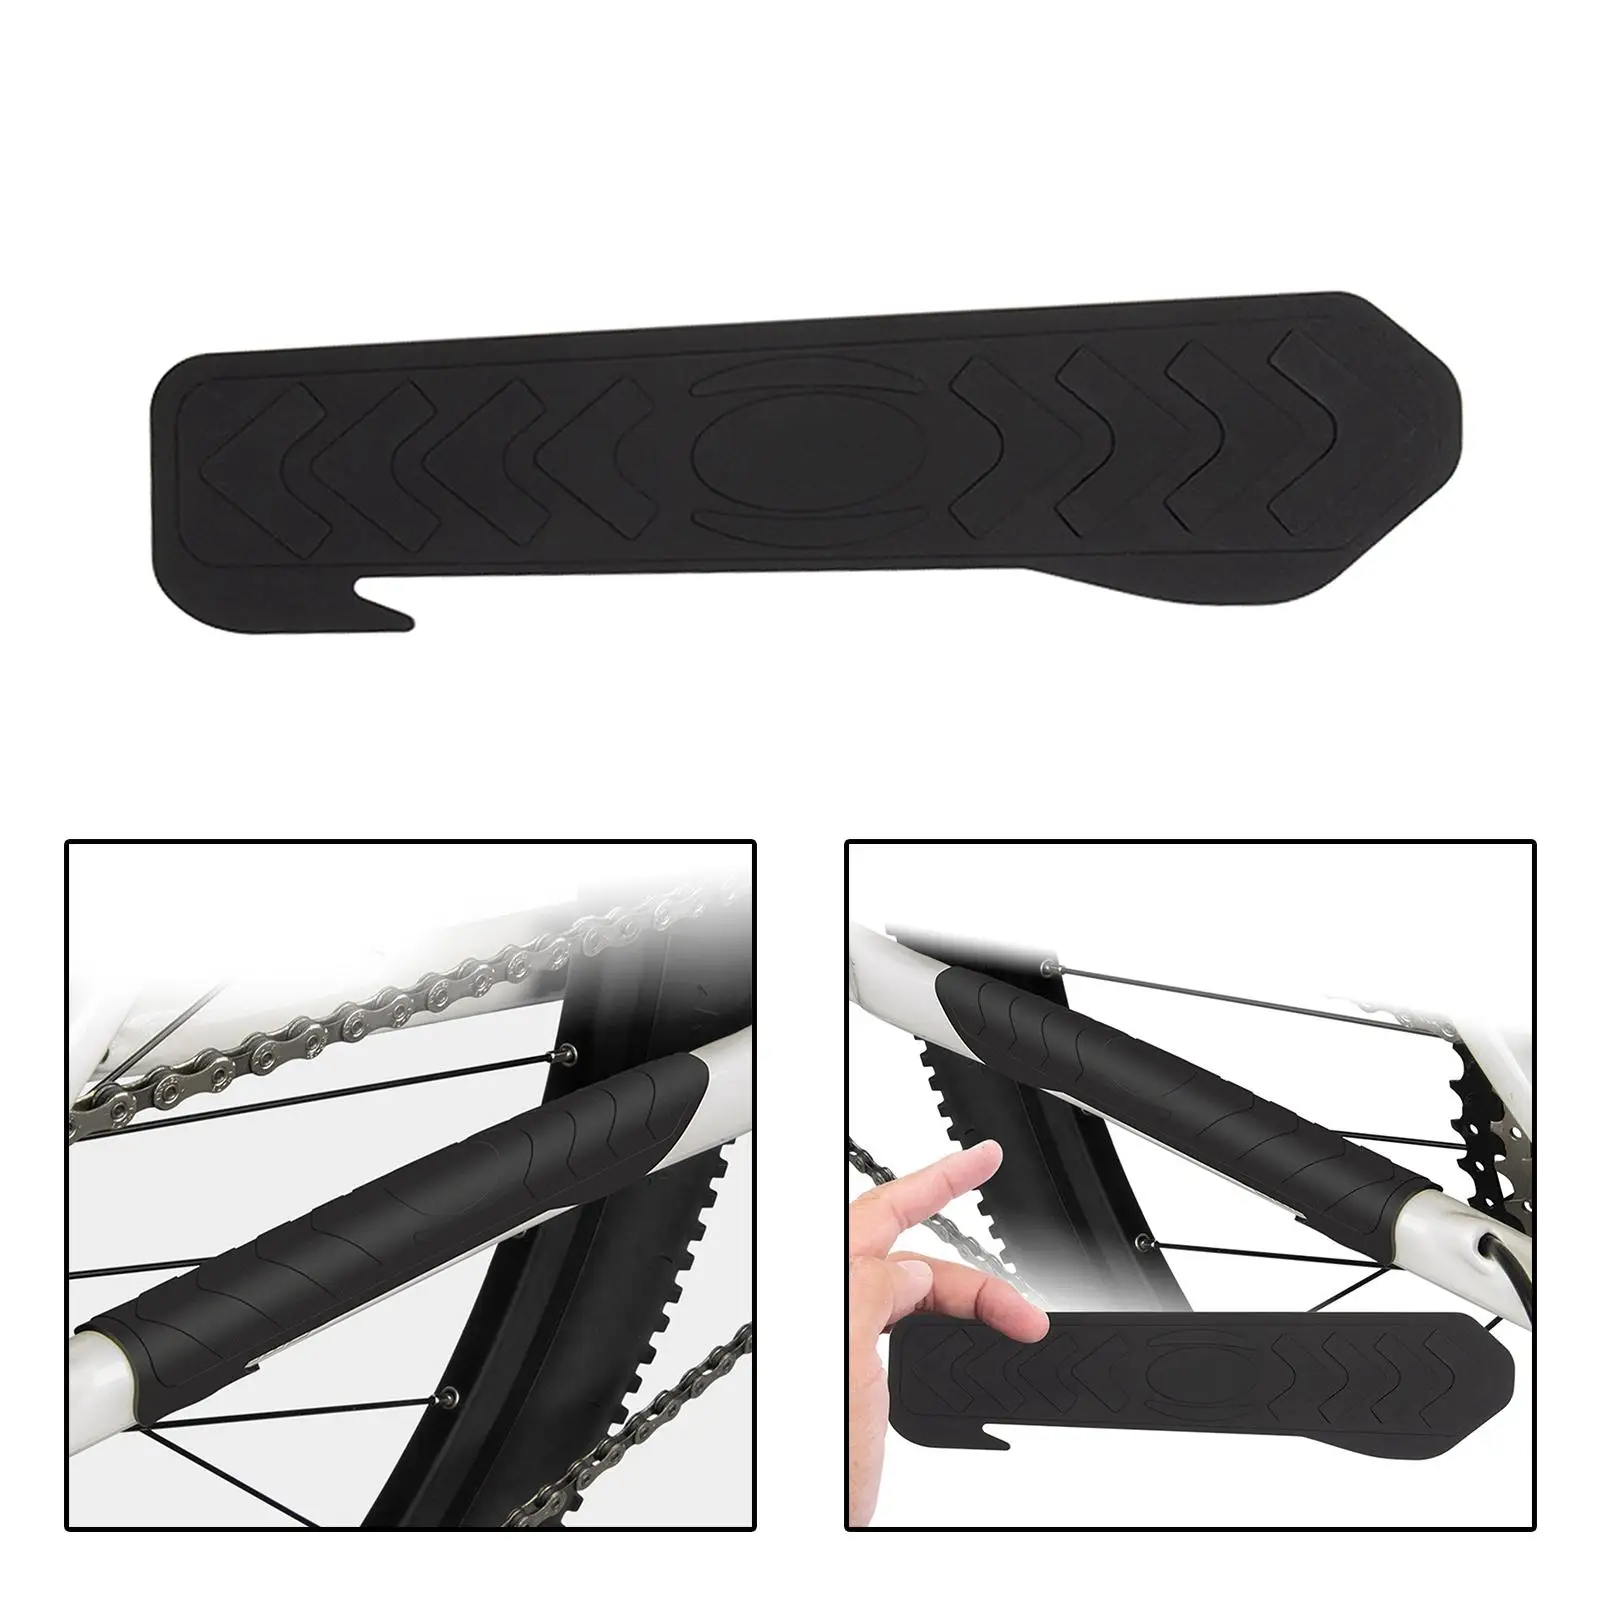 Bike Chainstay Protector Sticker Tape Portable Silicone Bicycle Chain Stay Frame